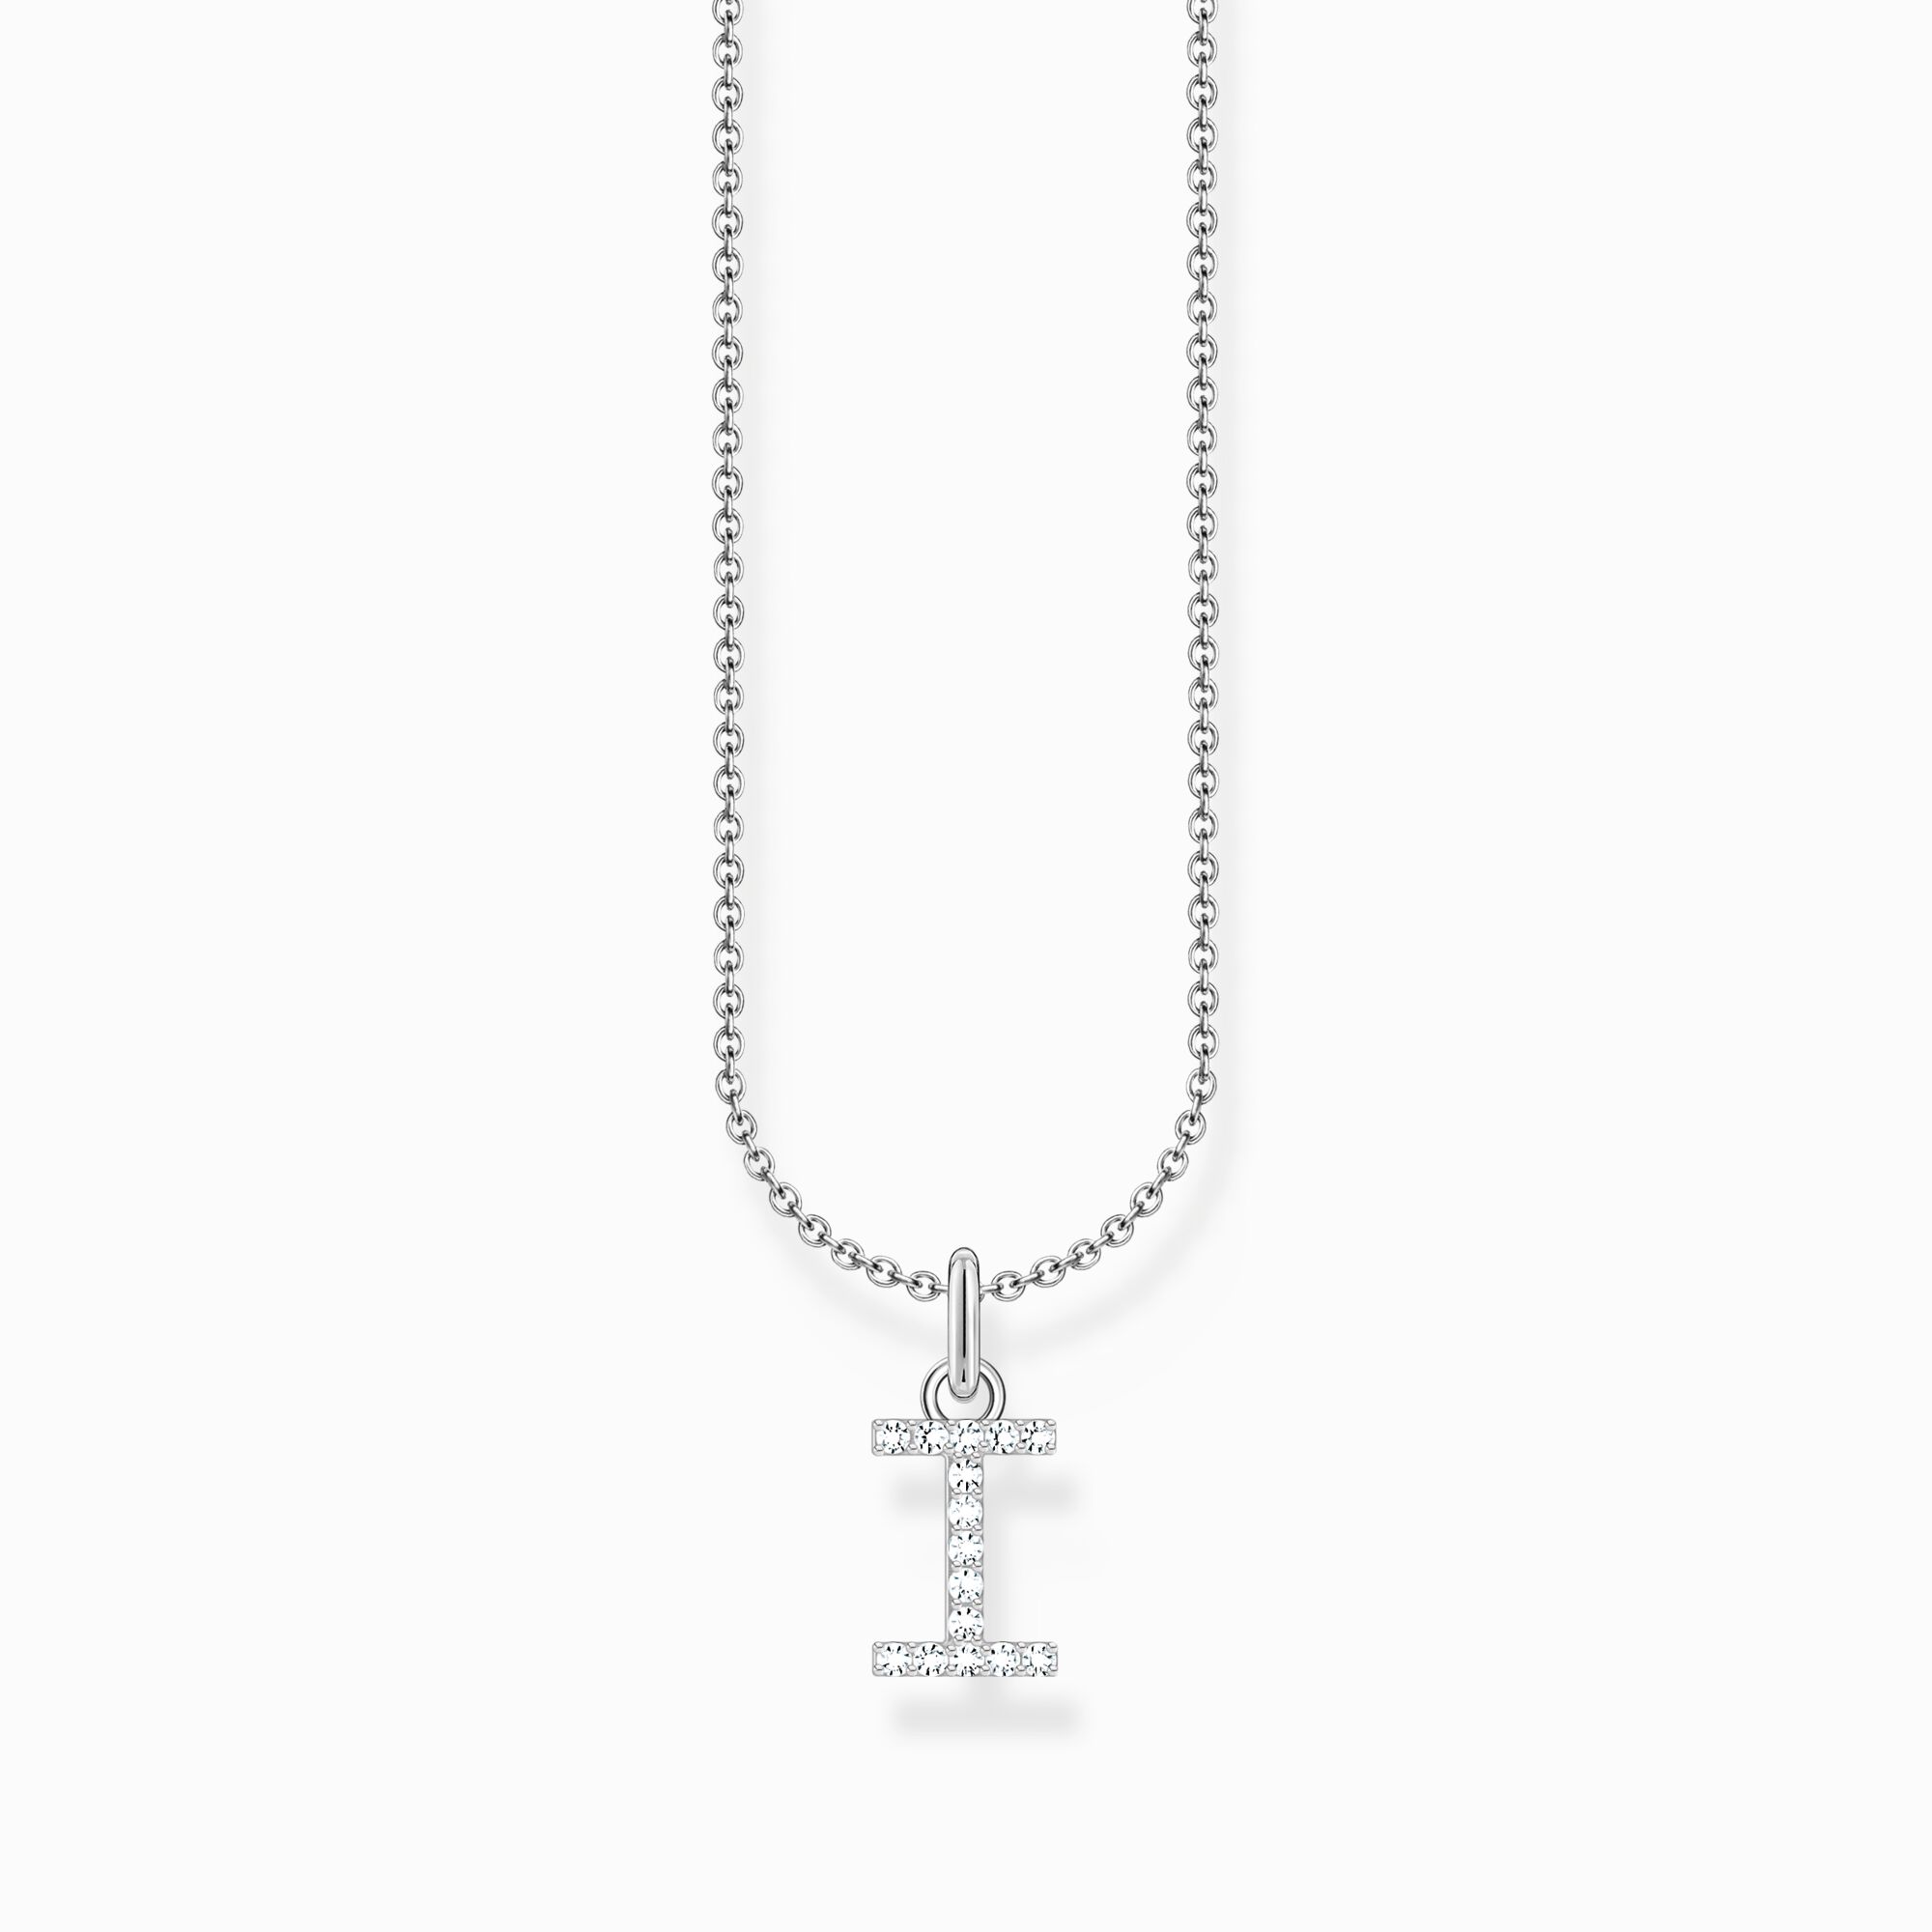 Silver necklace with letter pendant I and white zirconia from the Charming Collection collection in the THOMAS SABO online store